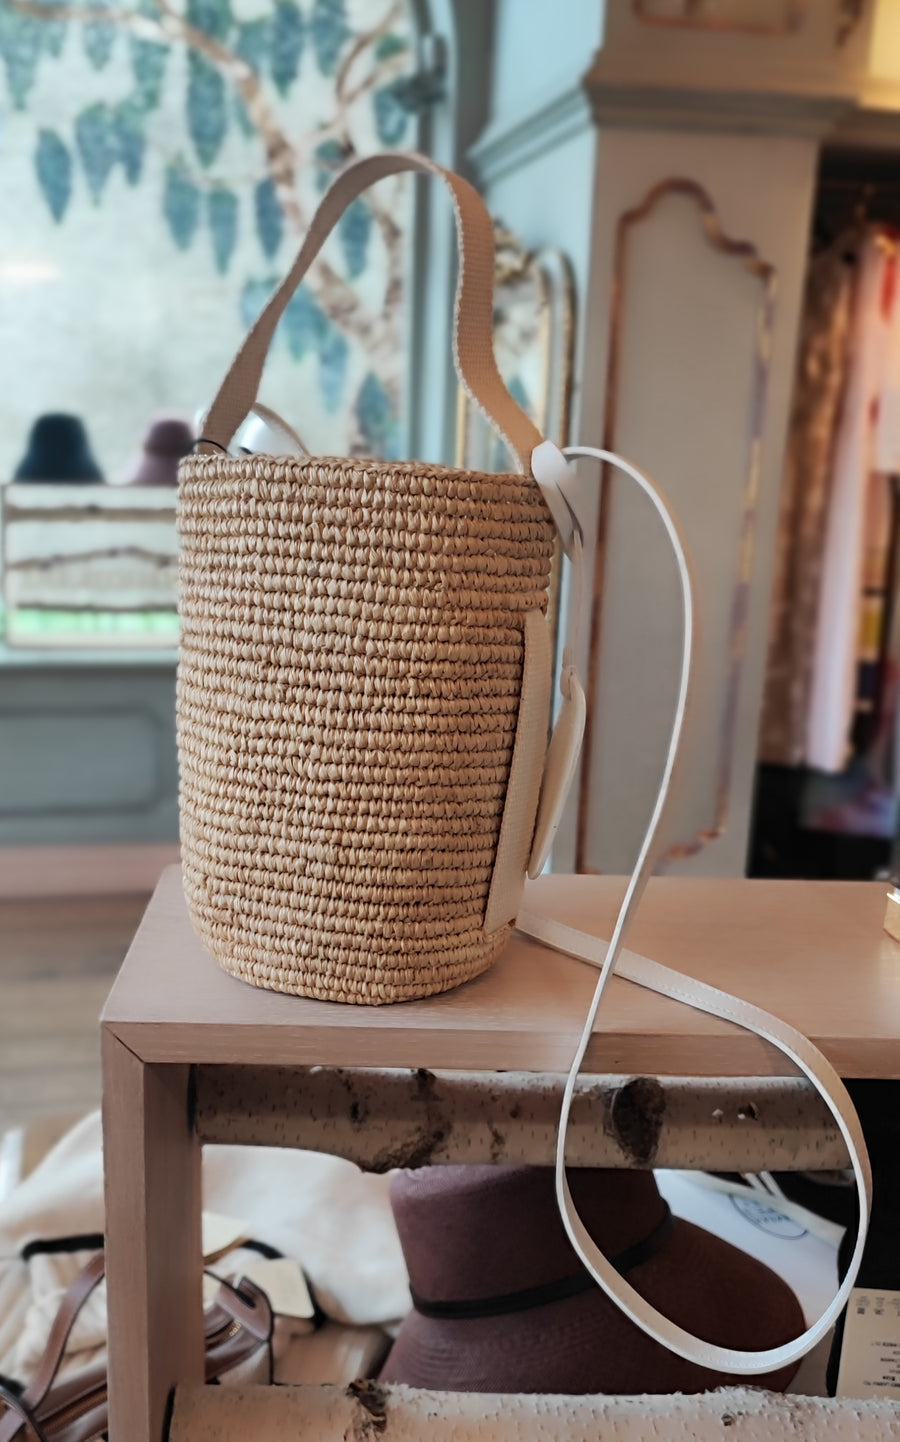 CATARZI RAFFIA CROCHET BASKET WITH CANVAS HANDLE AND WHITE LEATHER SHOULDER STRAP